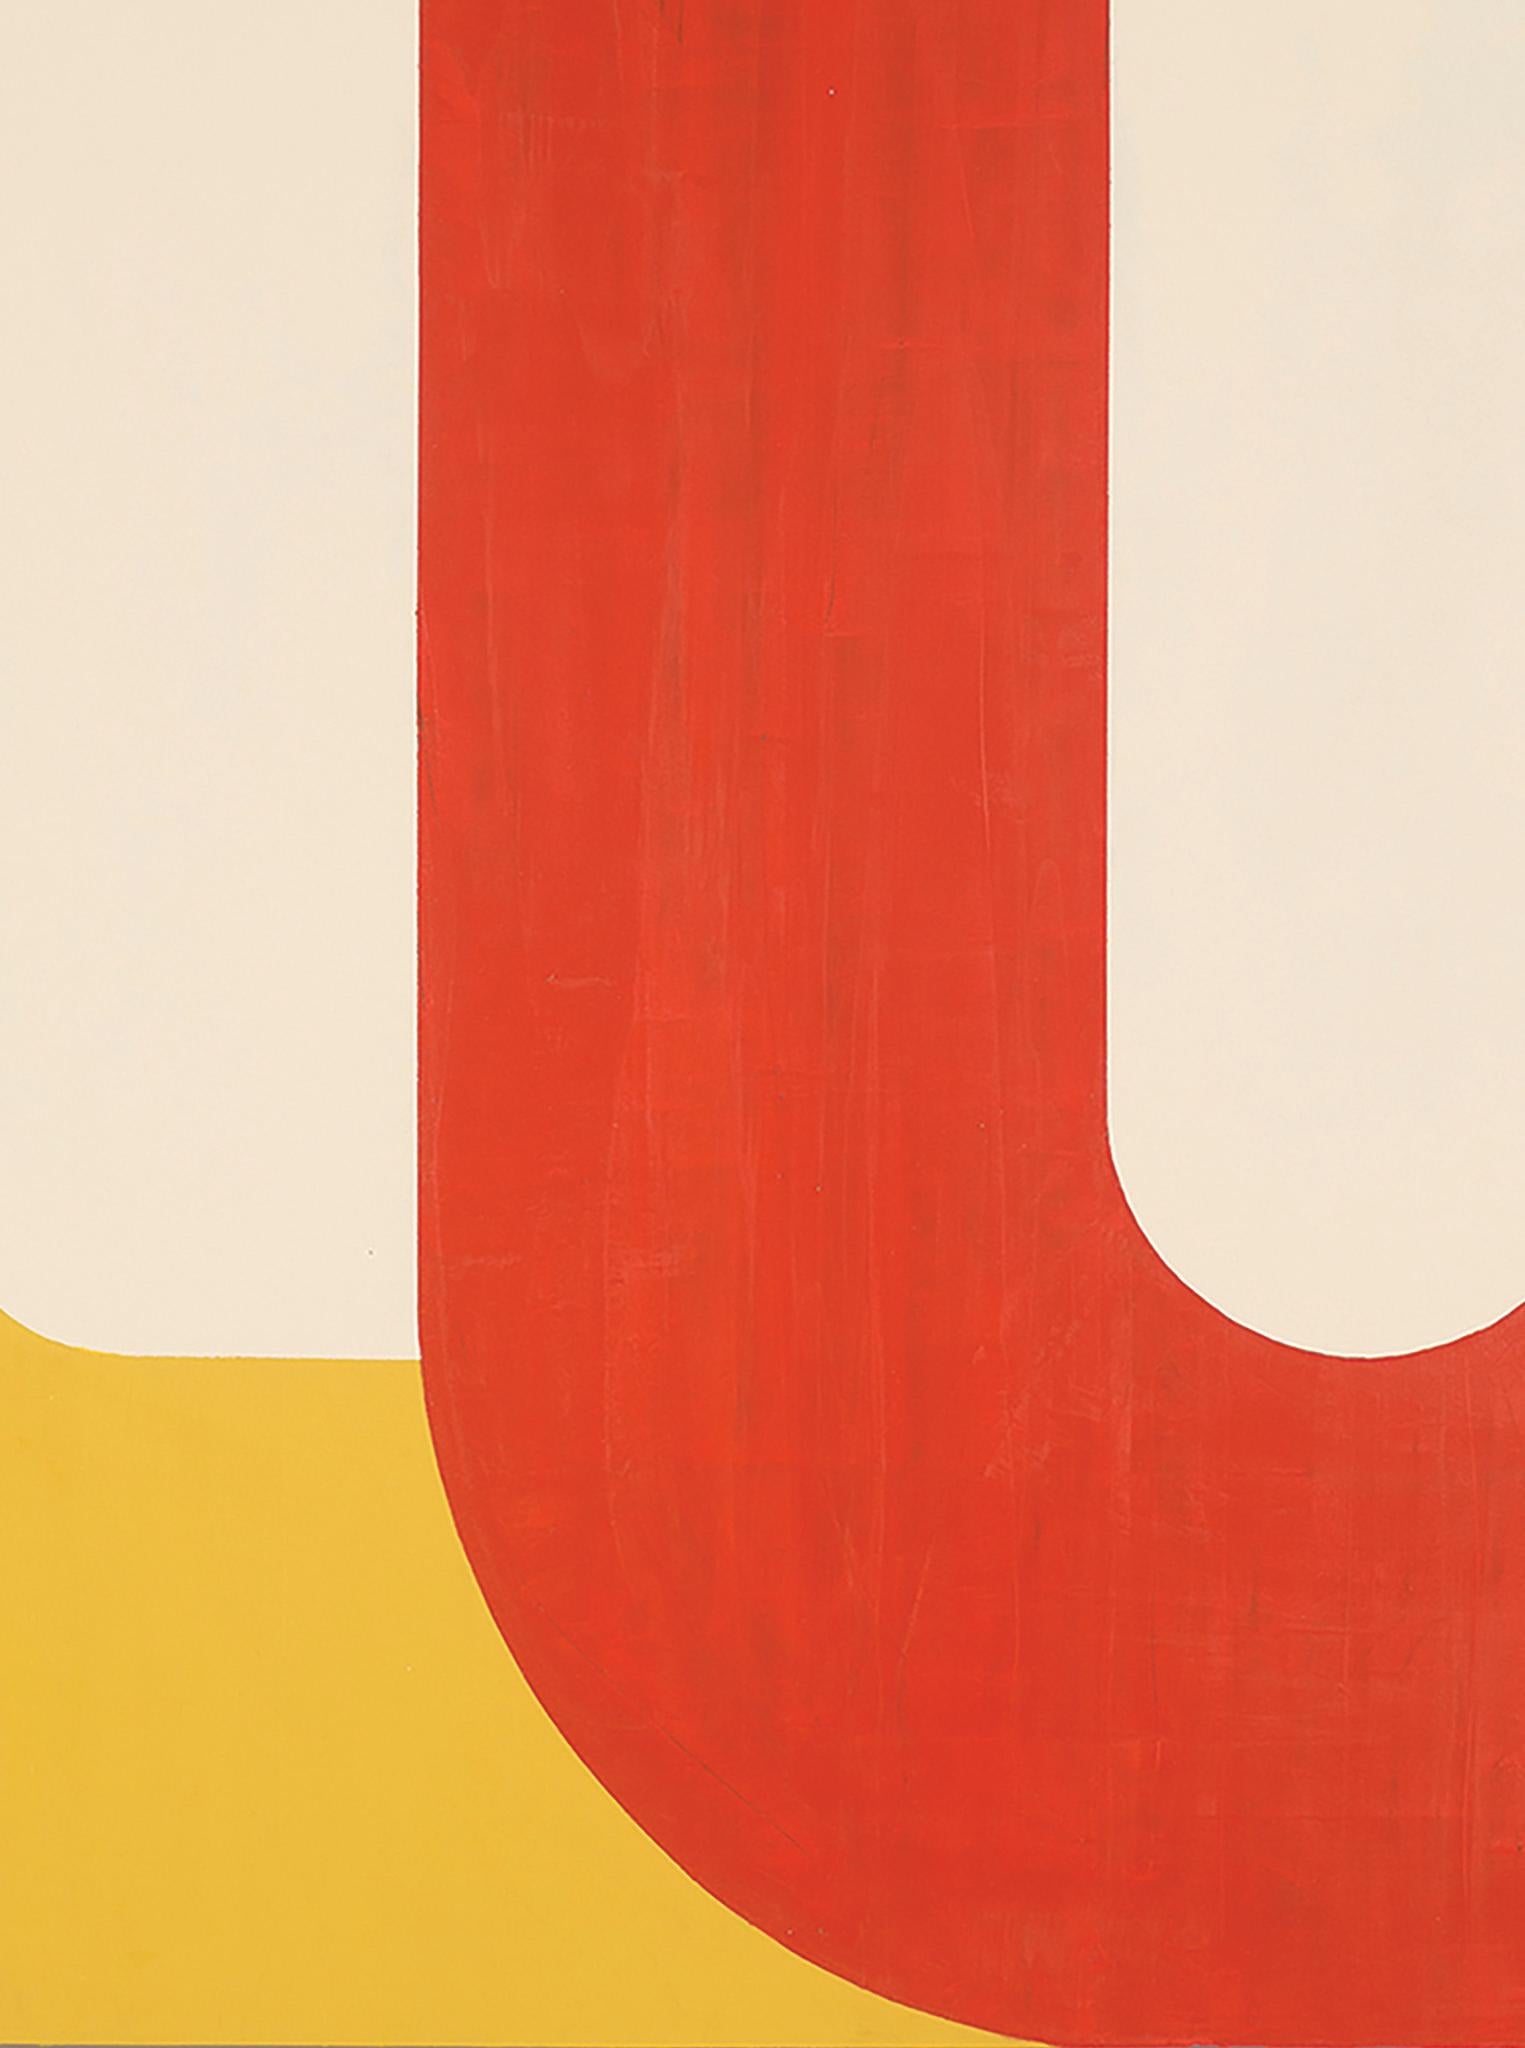 Eternal Return, striking modern geometric abstract, red and yellow palette 2